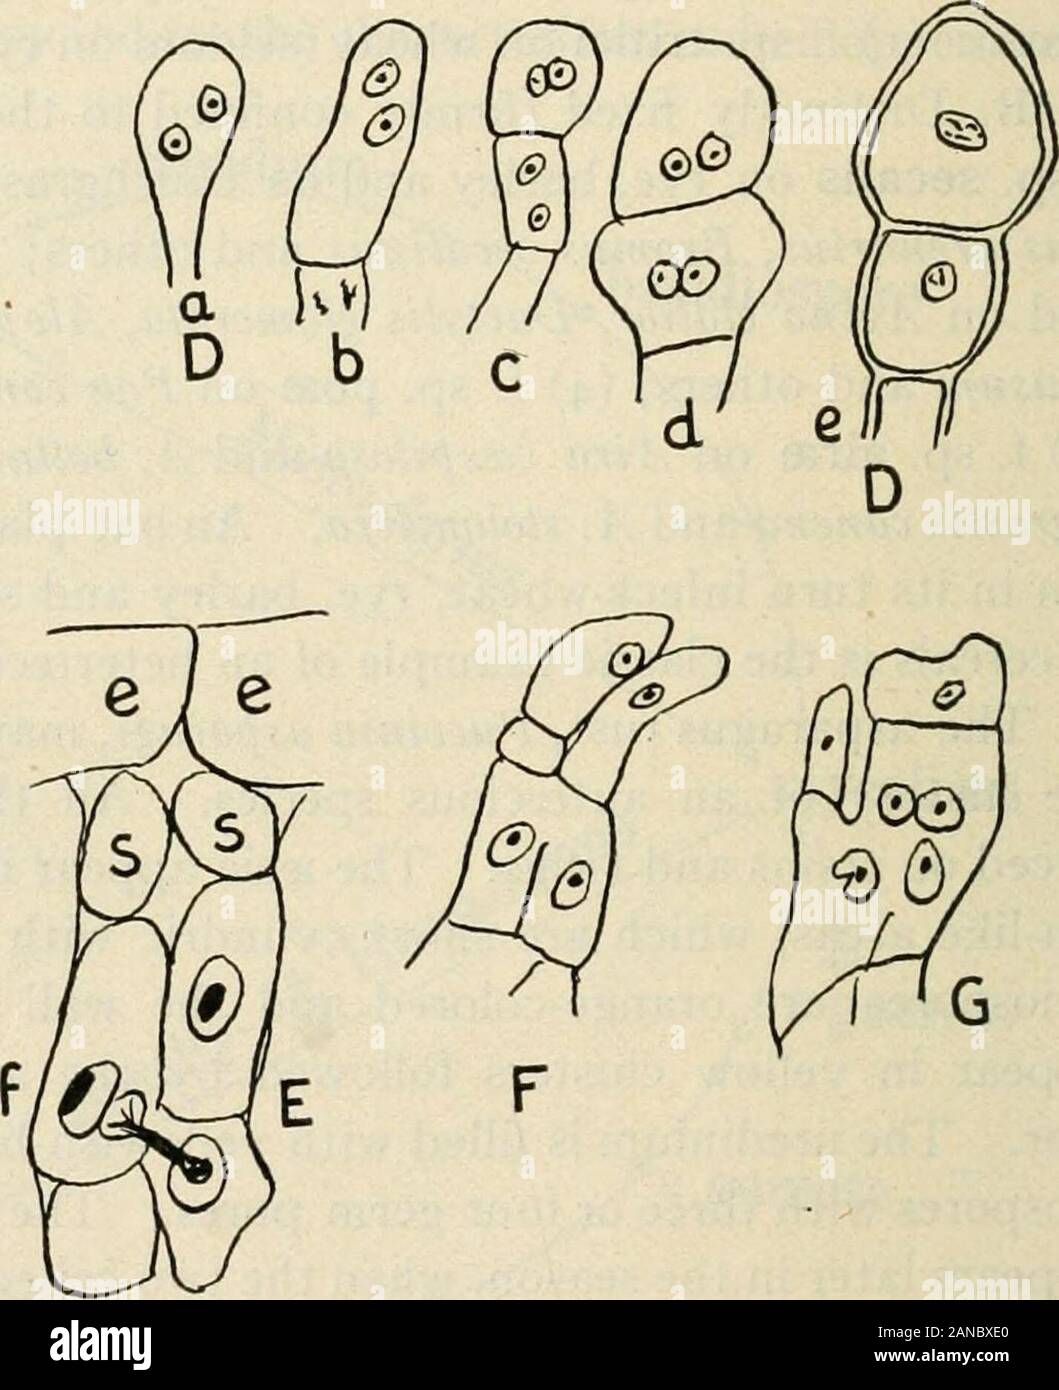 A text-book of mycology and plant pathology . Fig. 66.—a, Chain of young seciospores of Puccinia caricis; a, fusion tissue;b, basal (fusion) cell with conjugate nuclei; c, aeciospore mother-cell; d, intercalarycell; e, young aeciospore; B, germinating aeciospore of P. caricis; C, teliospore of P.caricis; D, formation of teliospores of P. falcaria {after Ditlschlag); E, developmentof aecium {after Blackman) of Phragmidium violaceiim; e, epidermal cell; s, sterilecell; below these cells a nucleus is seen migrating into the adjacent cell/; F and G,conjugation of two female cells to form basal cel Stock Photo